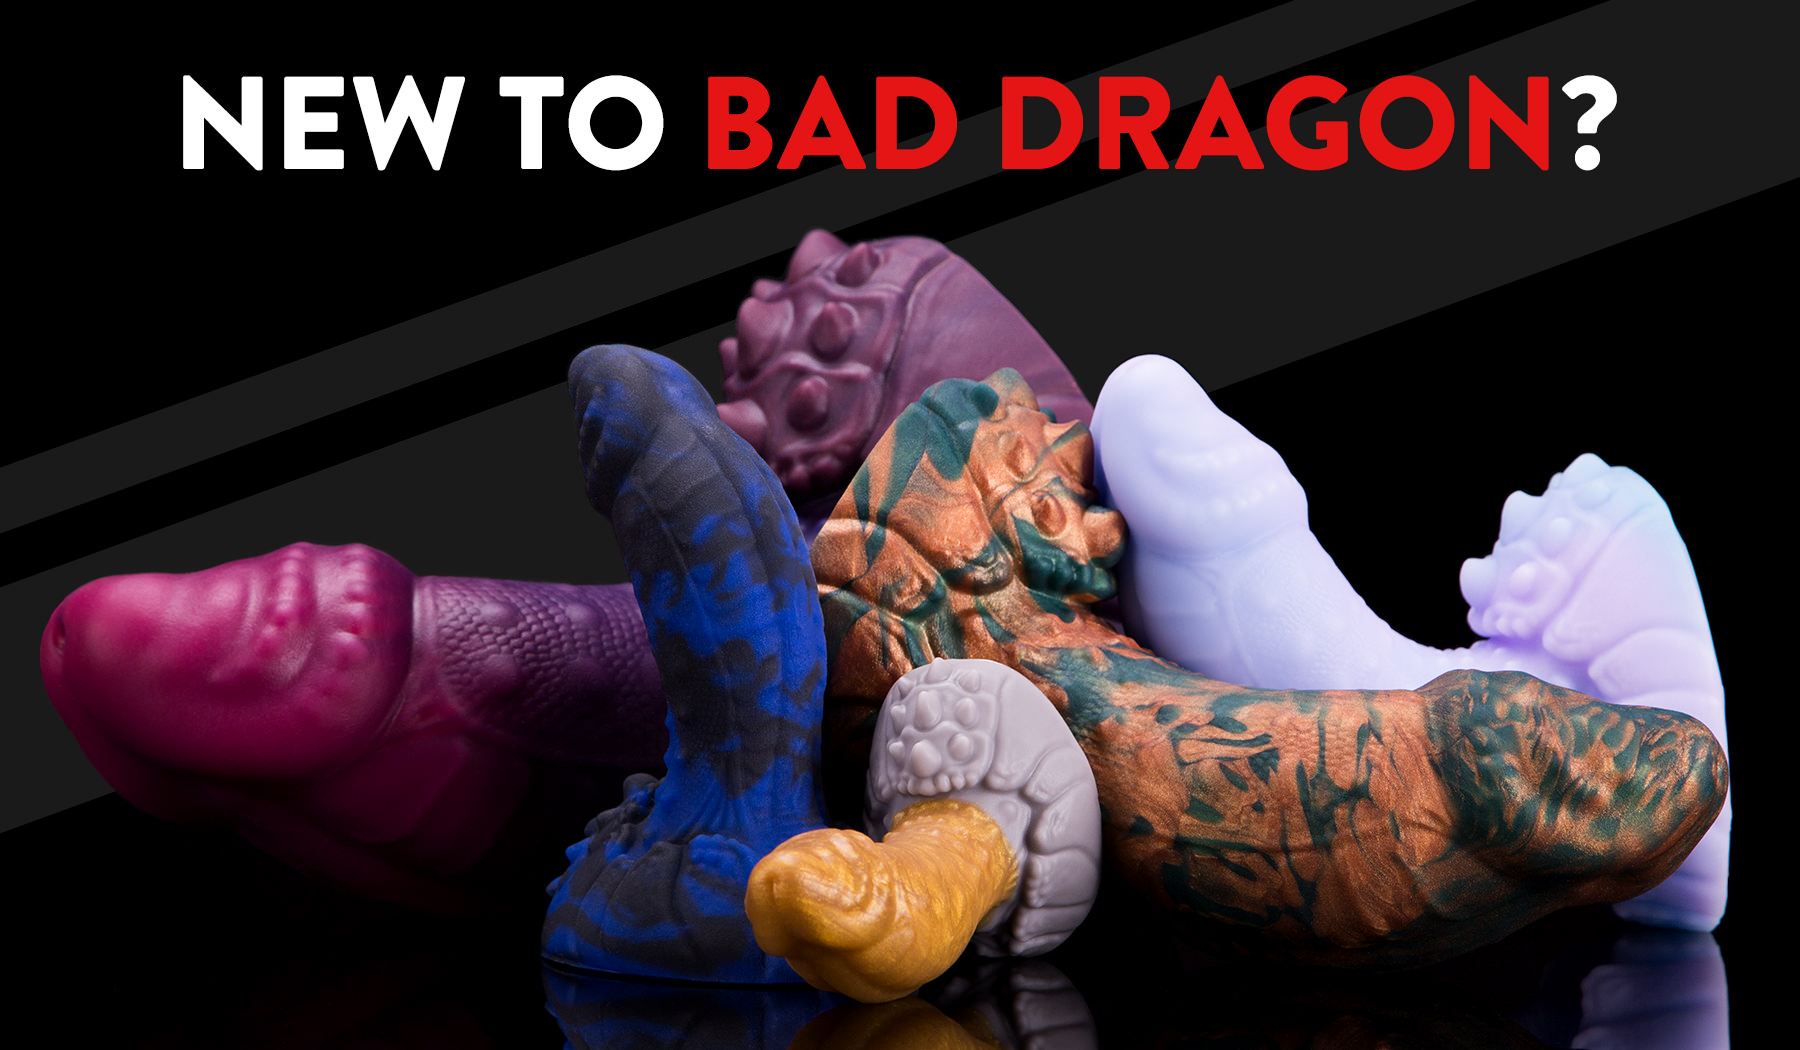 candice september recommends big bad dragon dildo pic